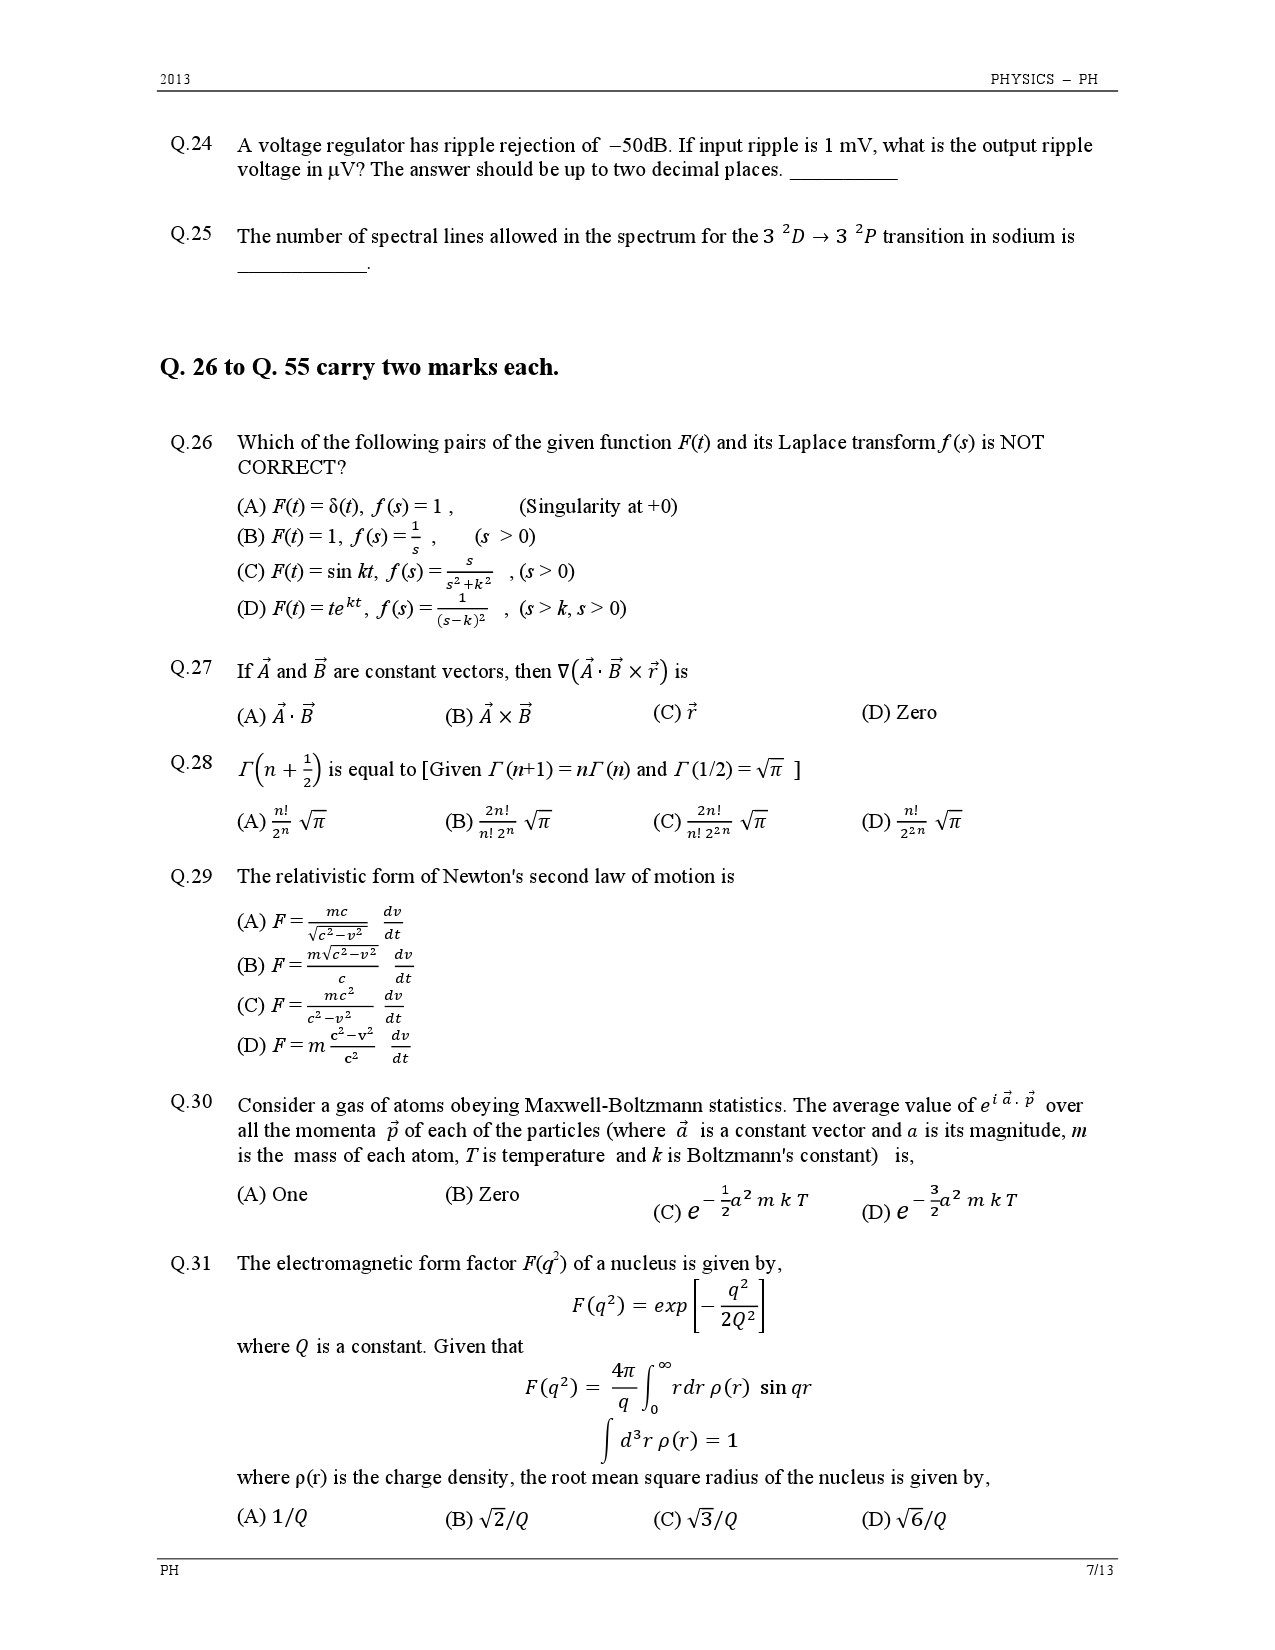 GATE Exam Question Paper 2013 Physics 7